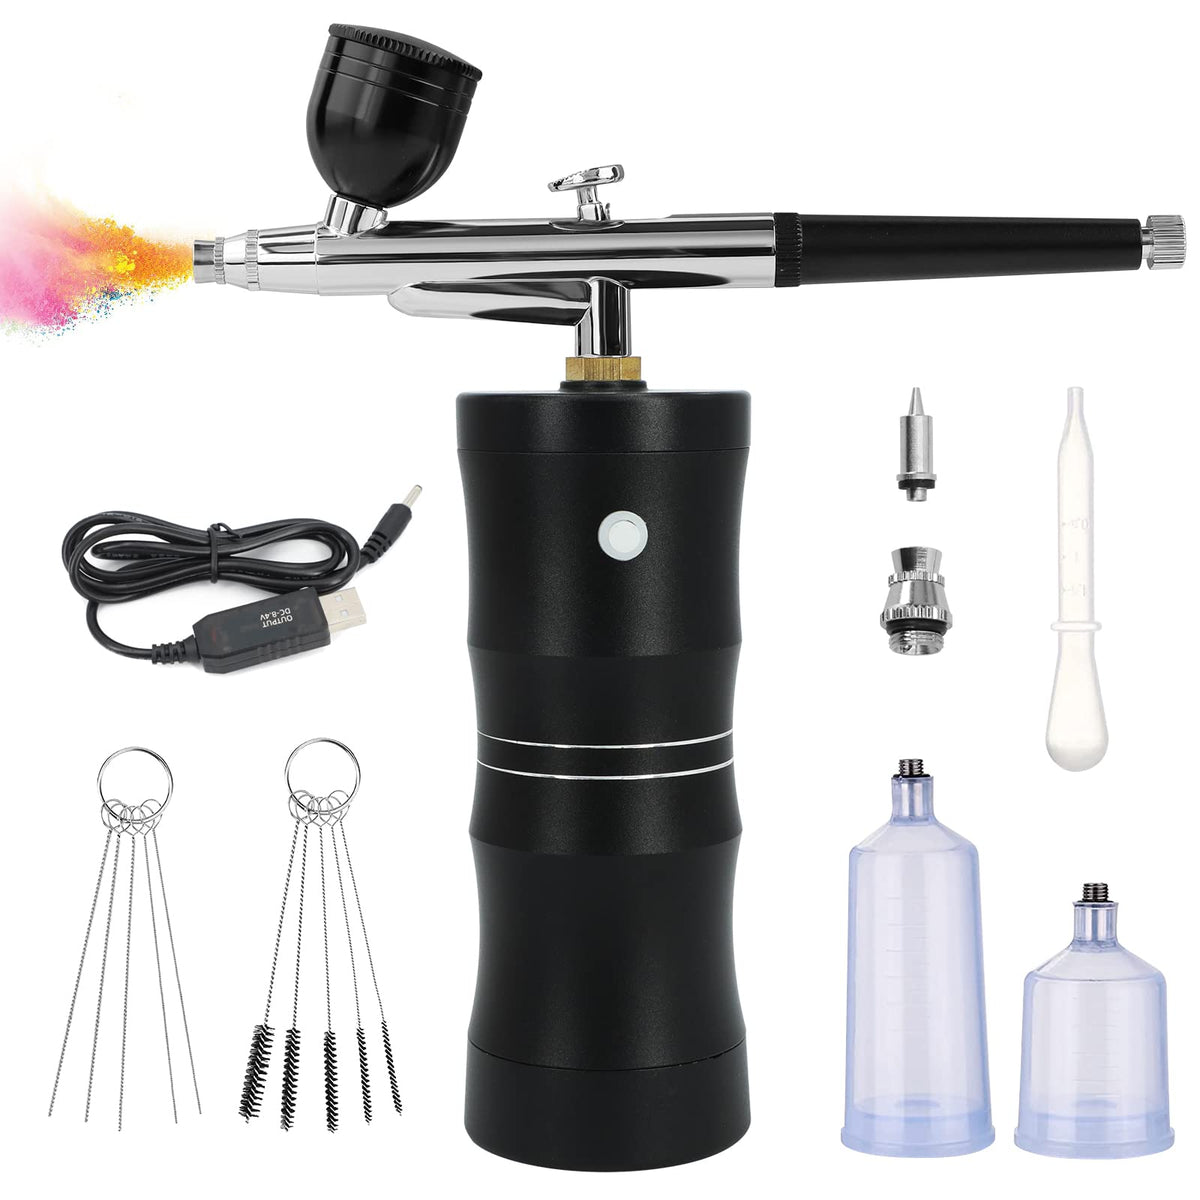 Airbrush Makeup Machine Kit with Spray Gun Air Compressor 0.4mm Needles for  Beauty Cosmetic Skin Care Tattoos Manicure Body Painting